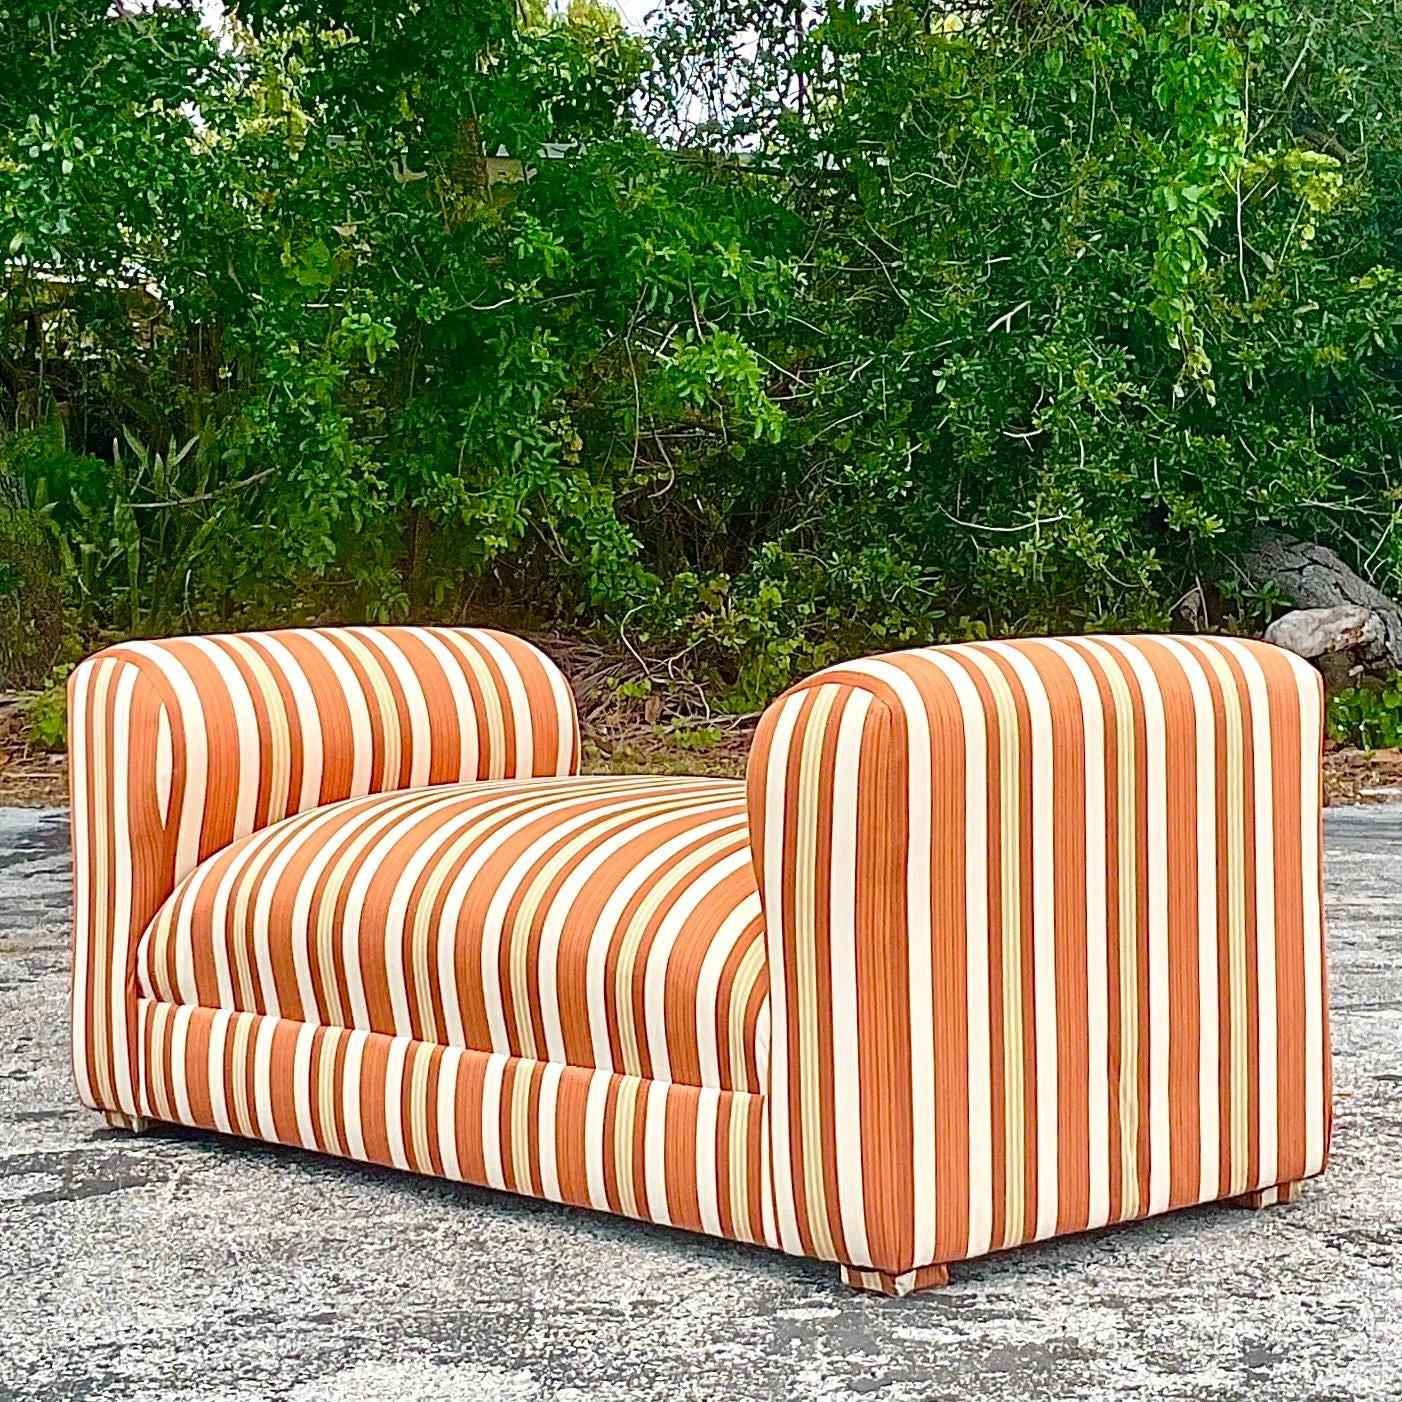 North American Late 20th Century Vintage Regency Striped Settee For Sale